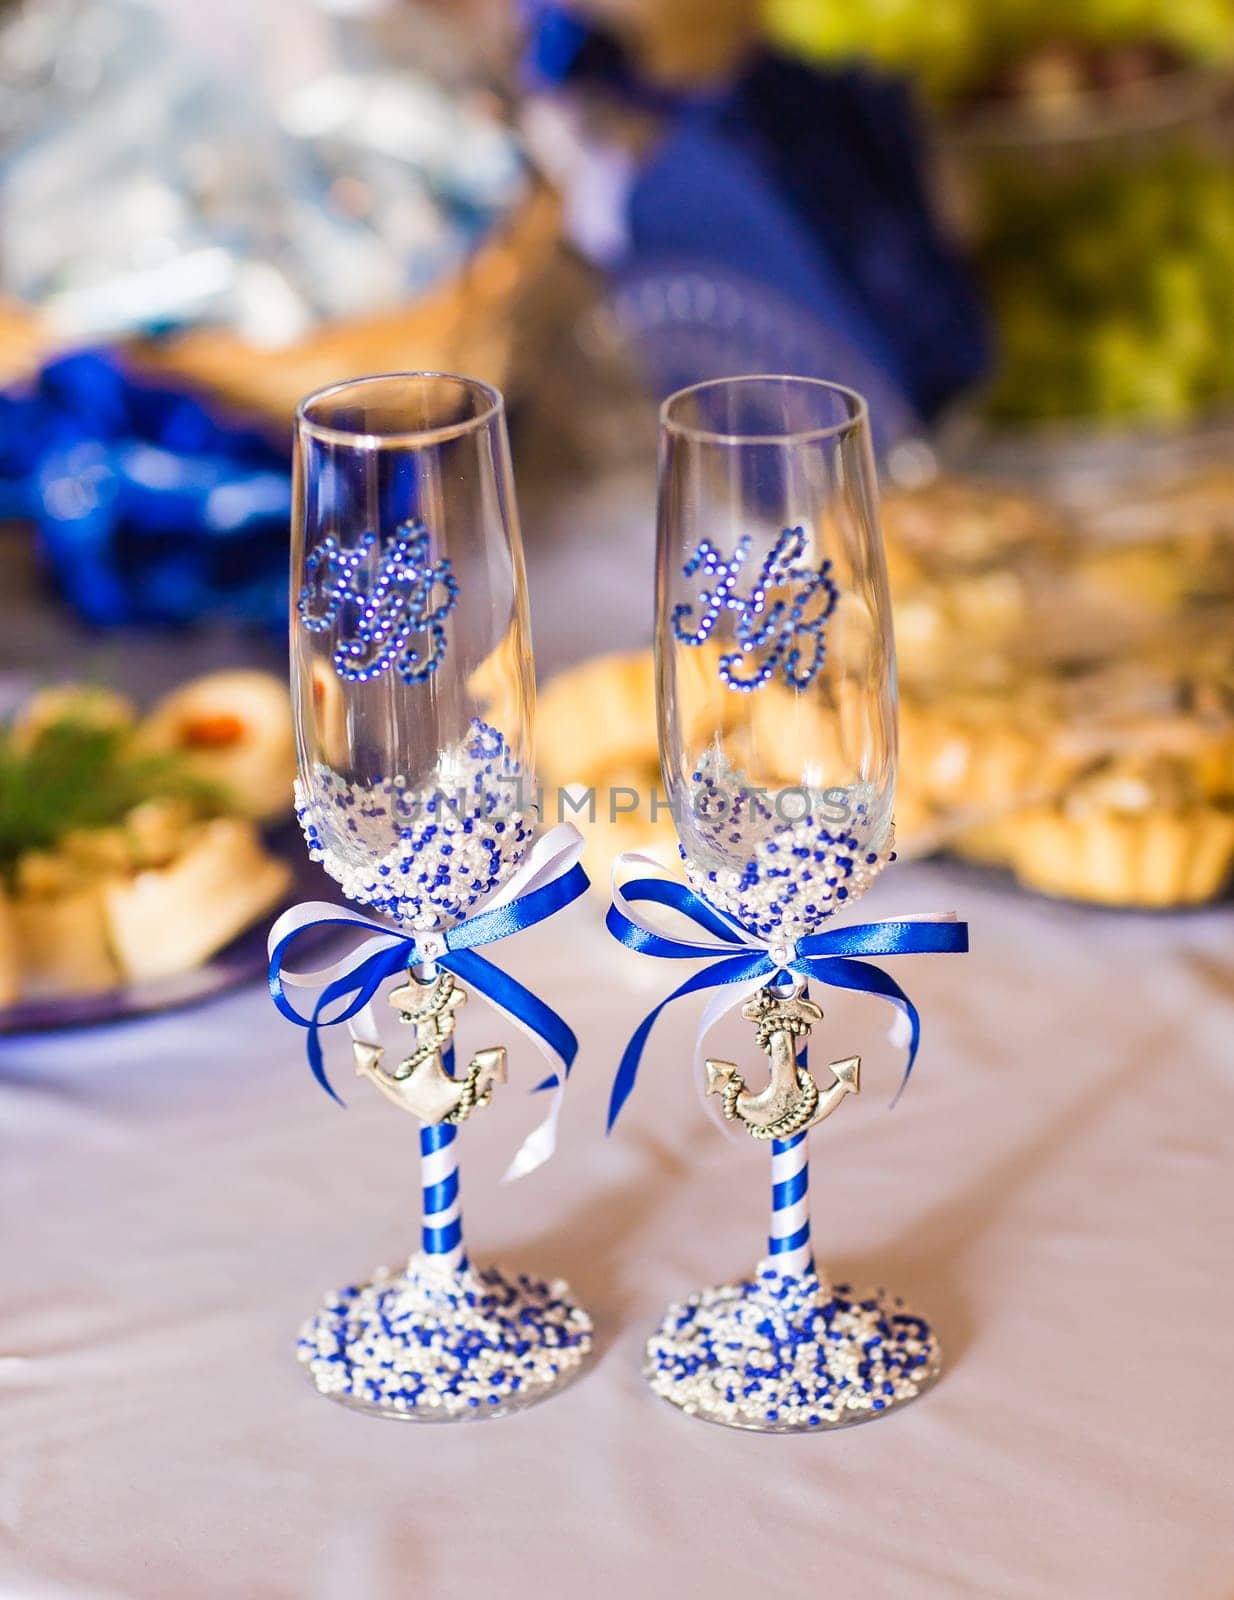 decorated glass of champagne by Satura86